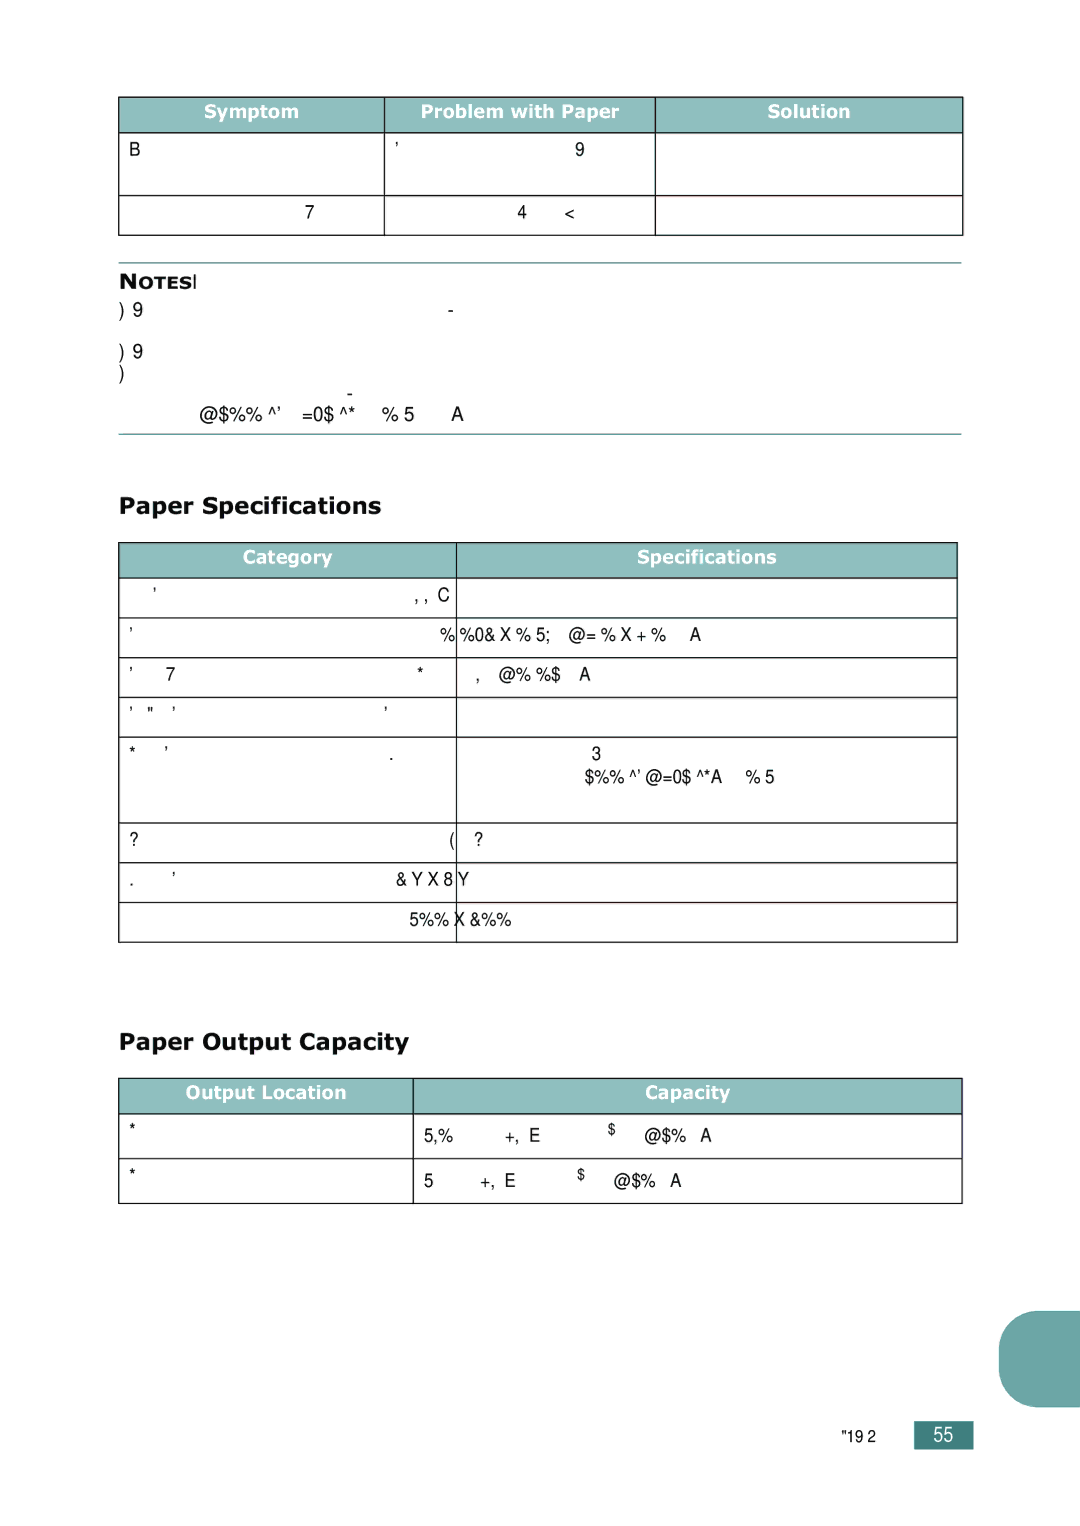 Samsung SF-755P manual Paper Specifications, Paper Output Capacity 